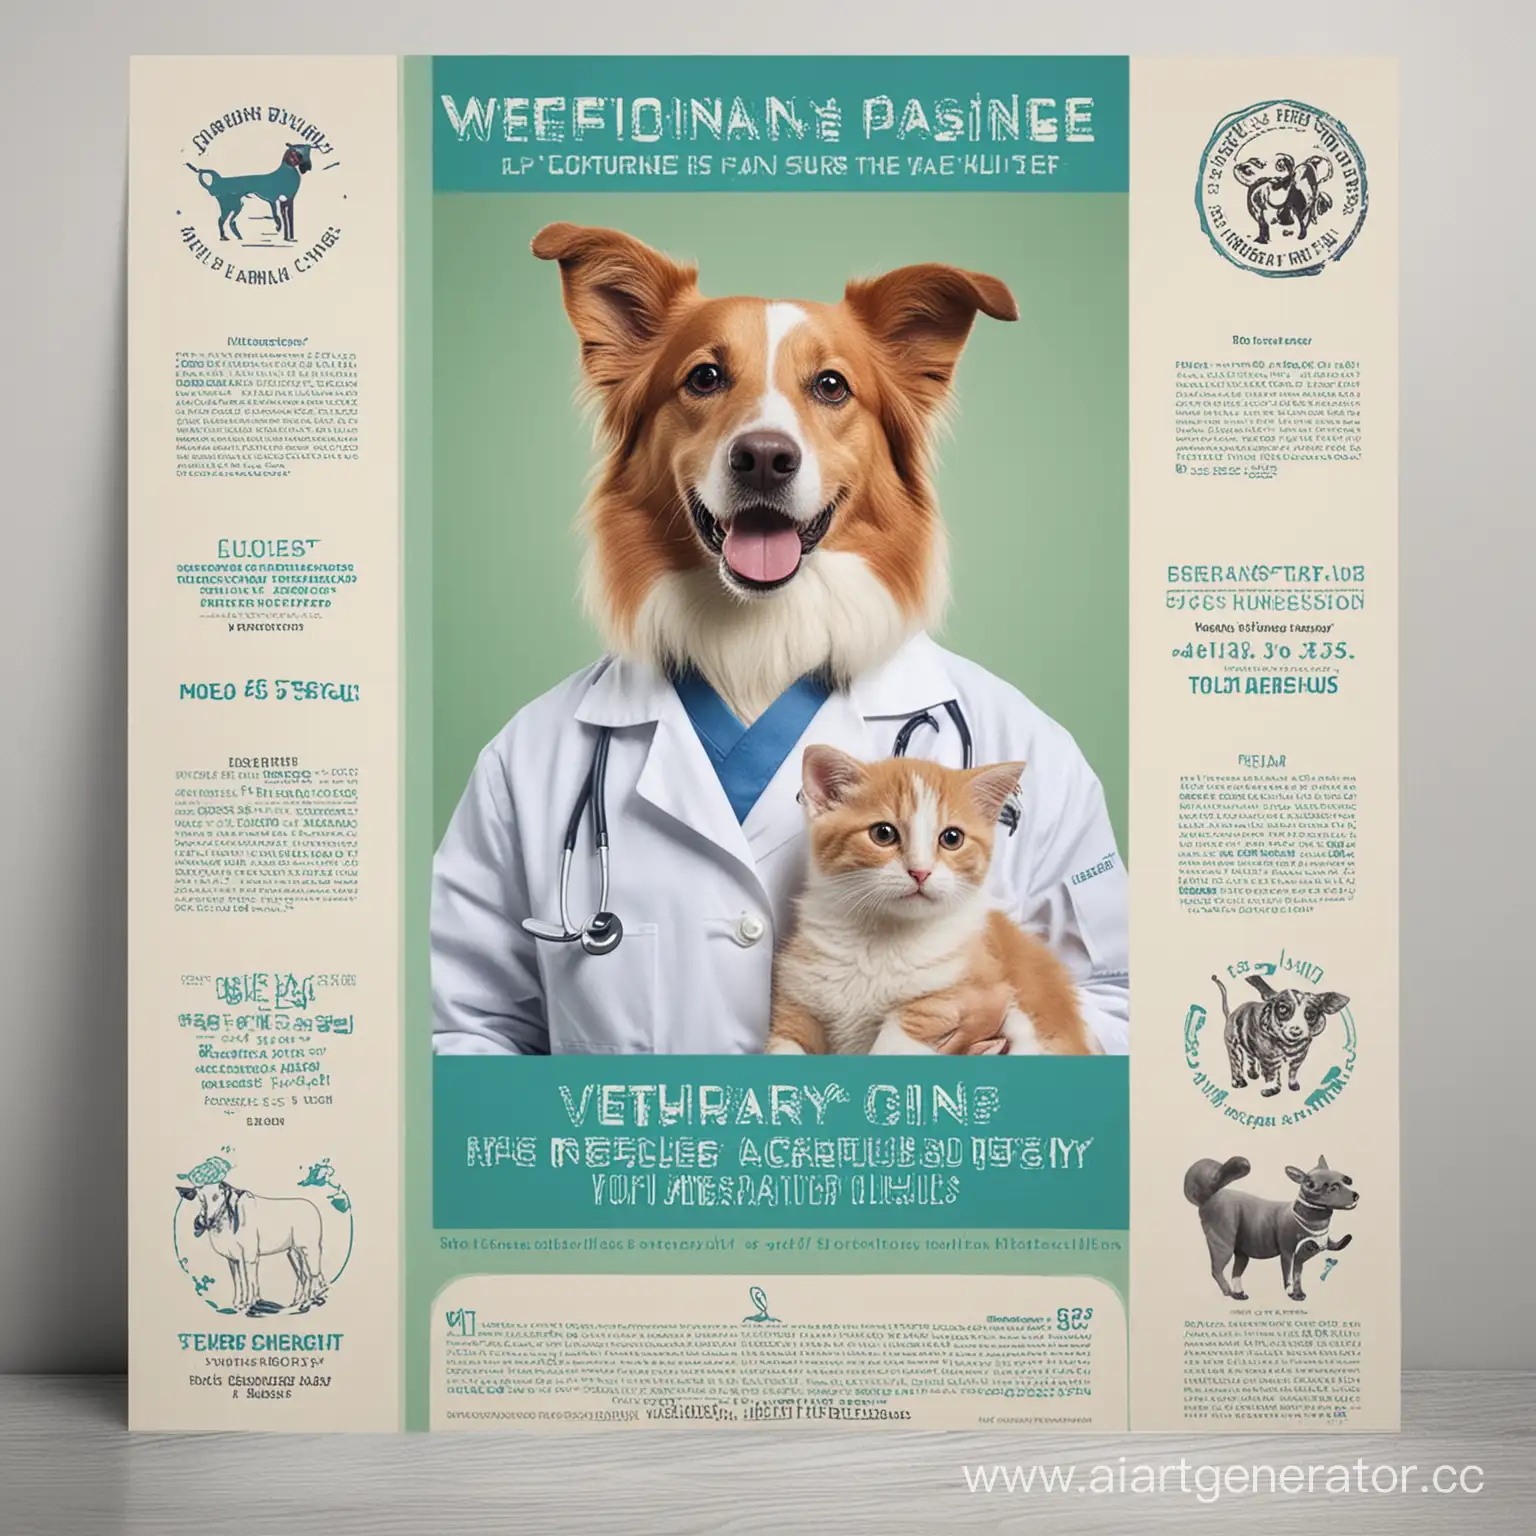 Vibrant-Veterinary-Clinic-Caring-for-Pets-with-Compassion